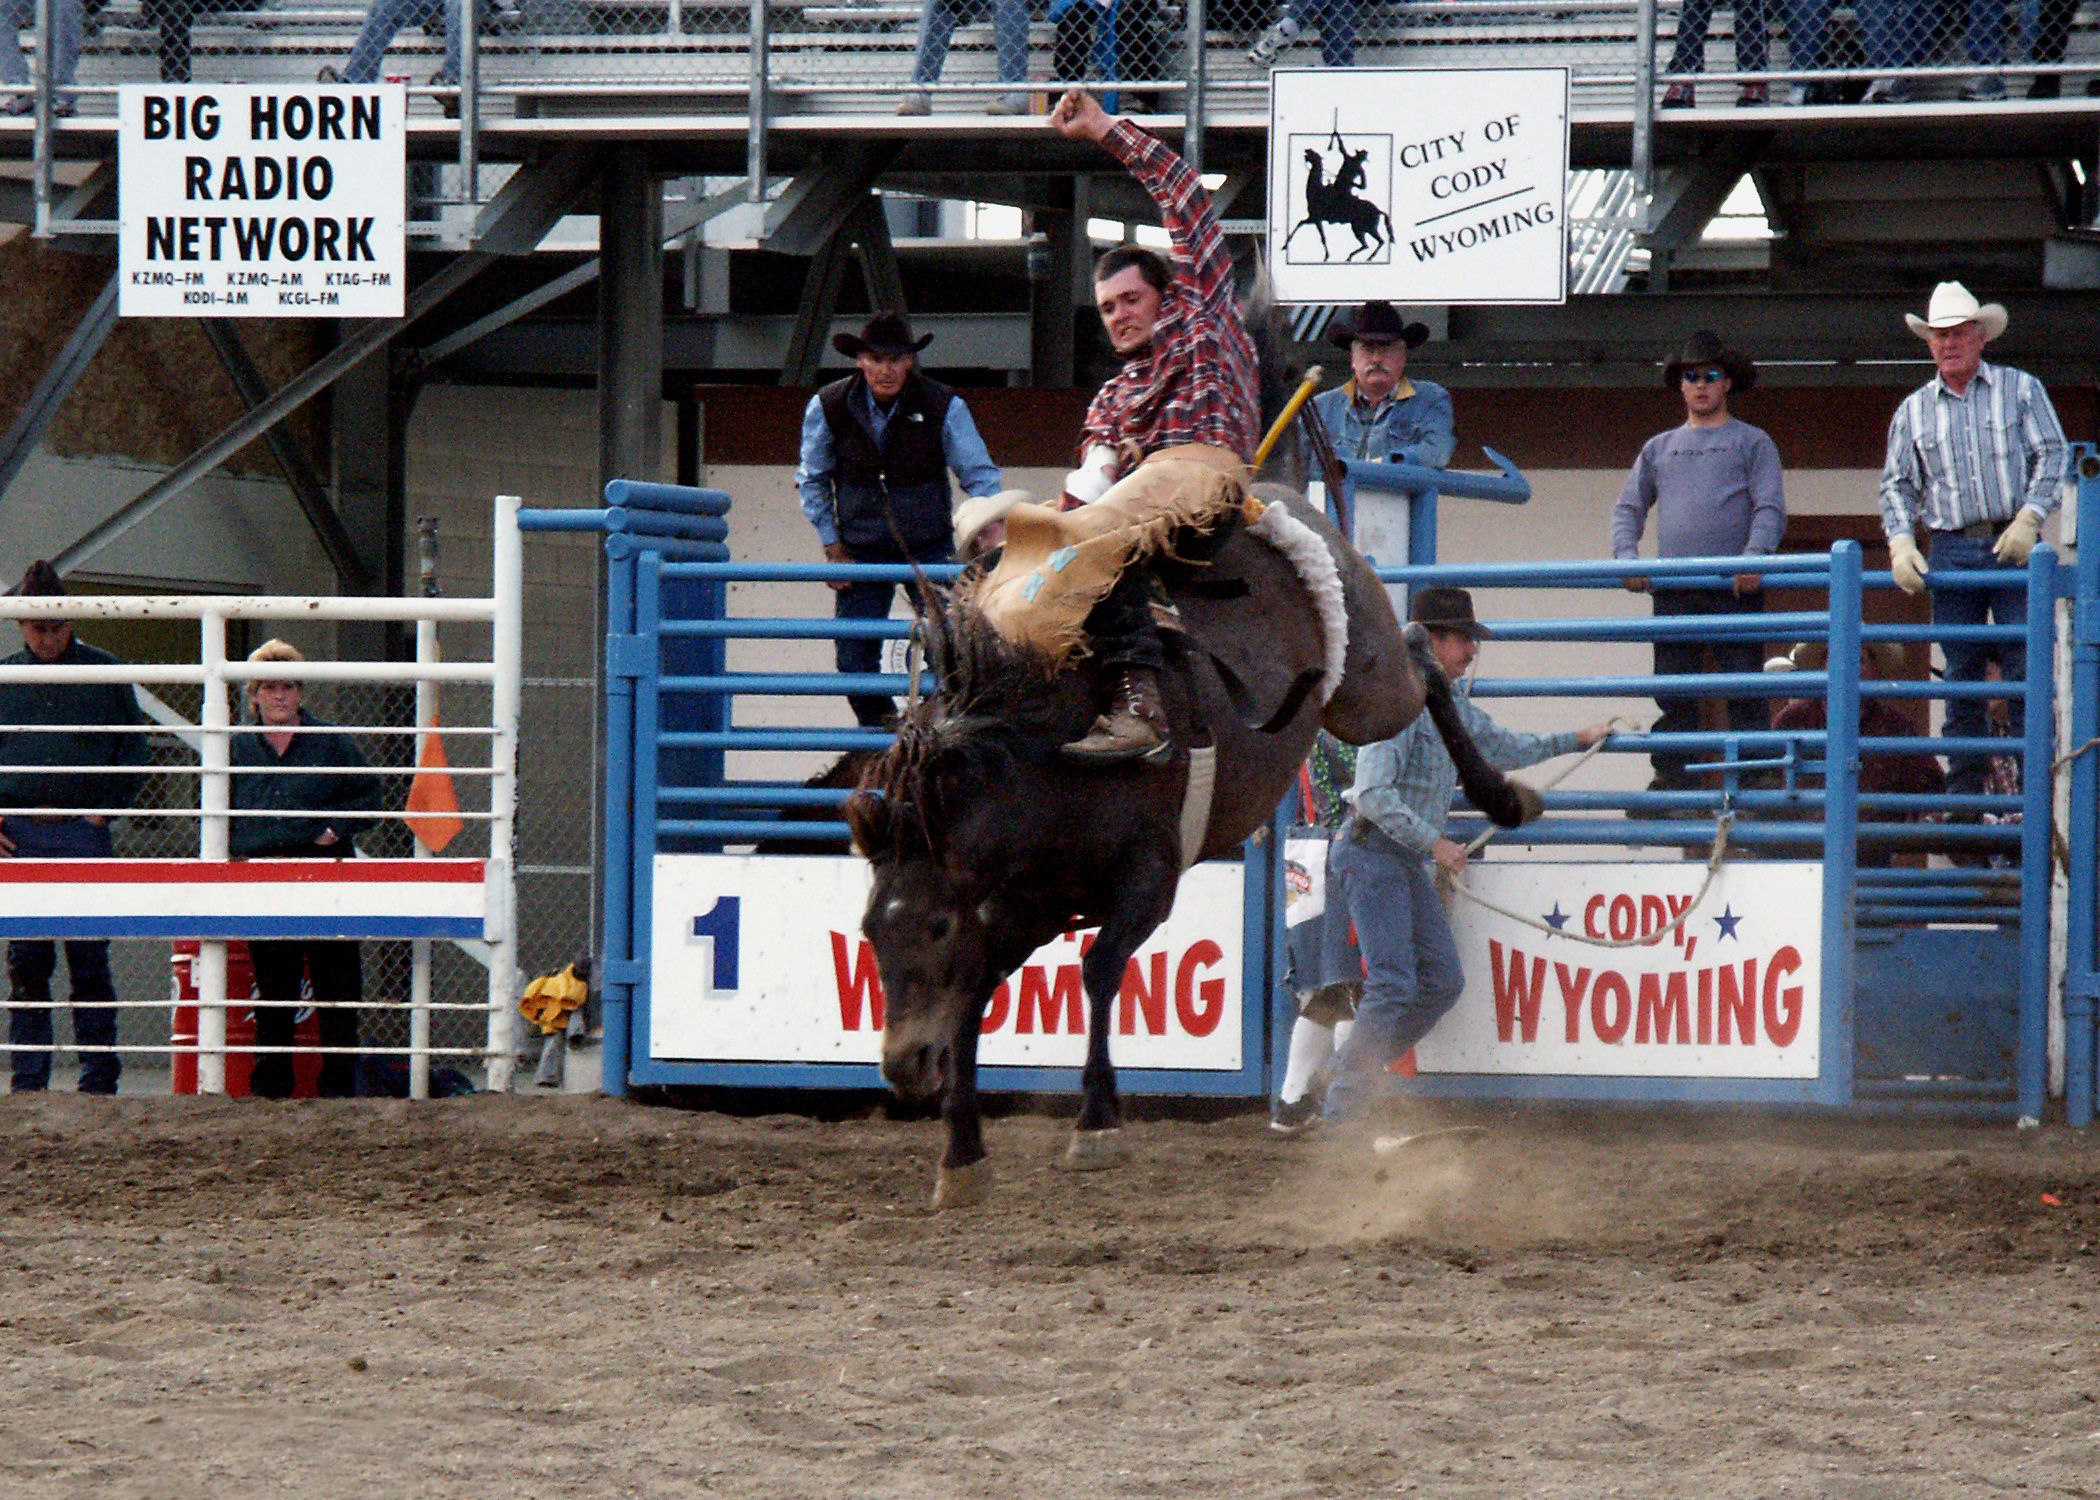 A rodeo rider holds on for dear life on the saddle of a bucking bronco.